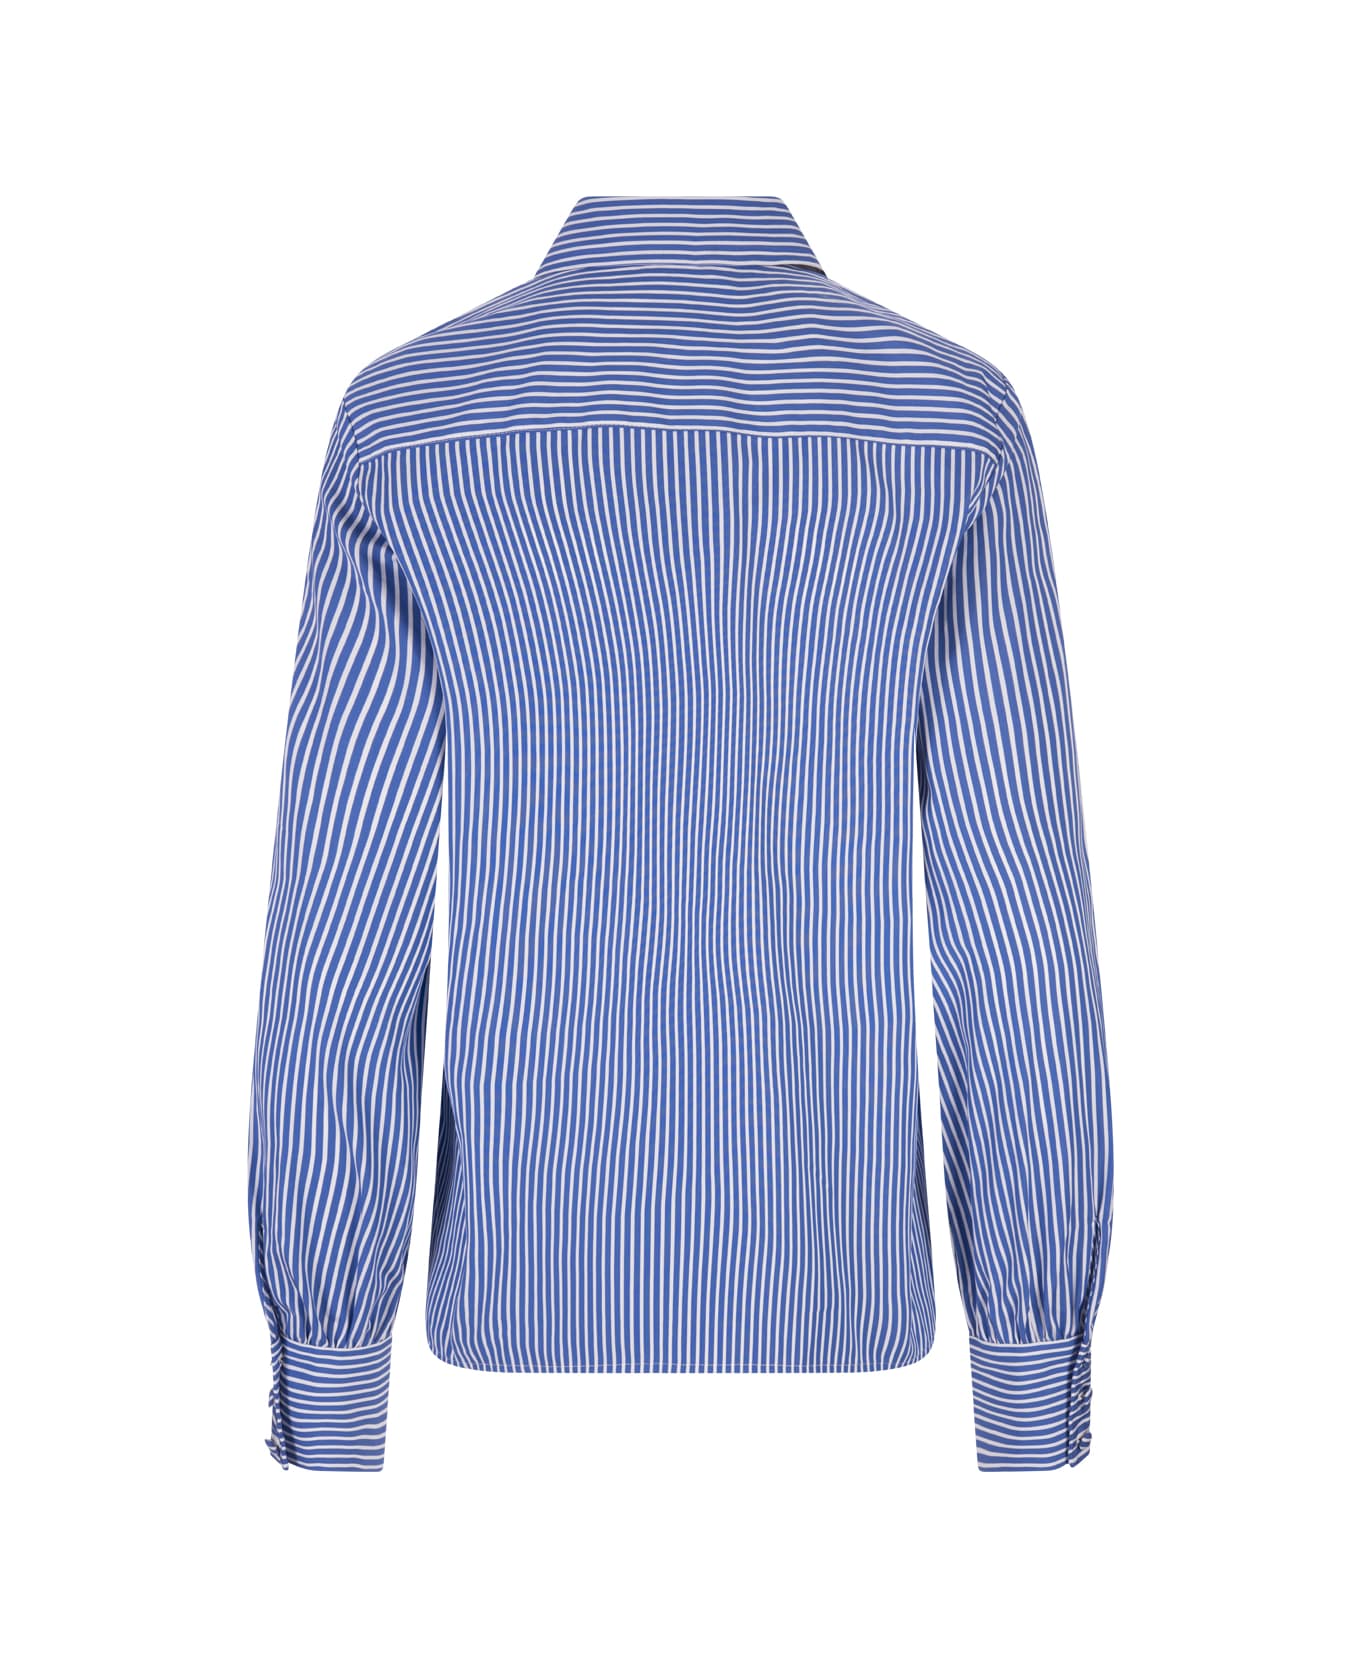 Etro Navy Blue Striped Shirt With Logo - Gnawed Blue